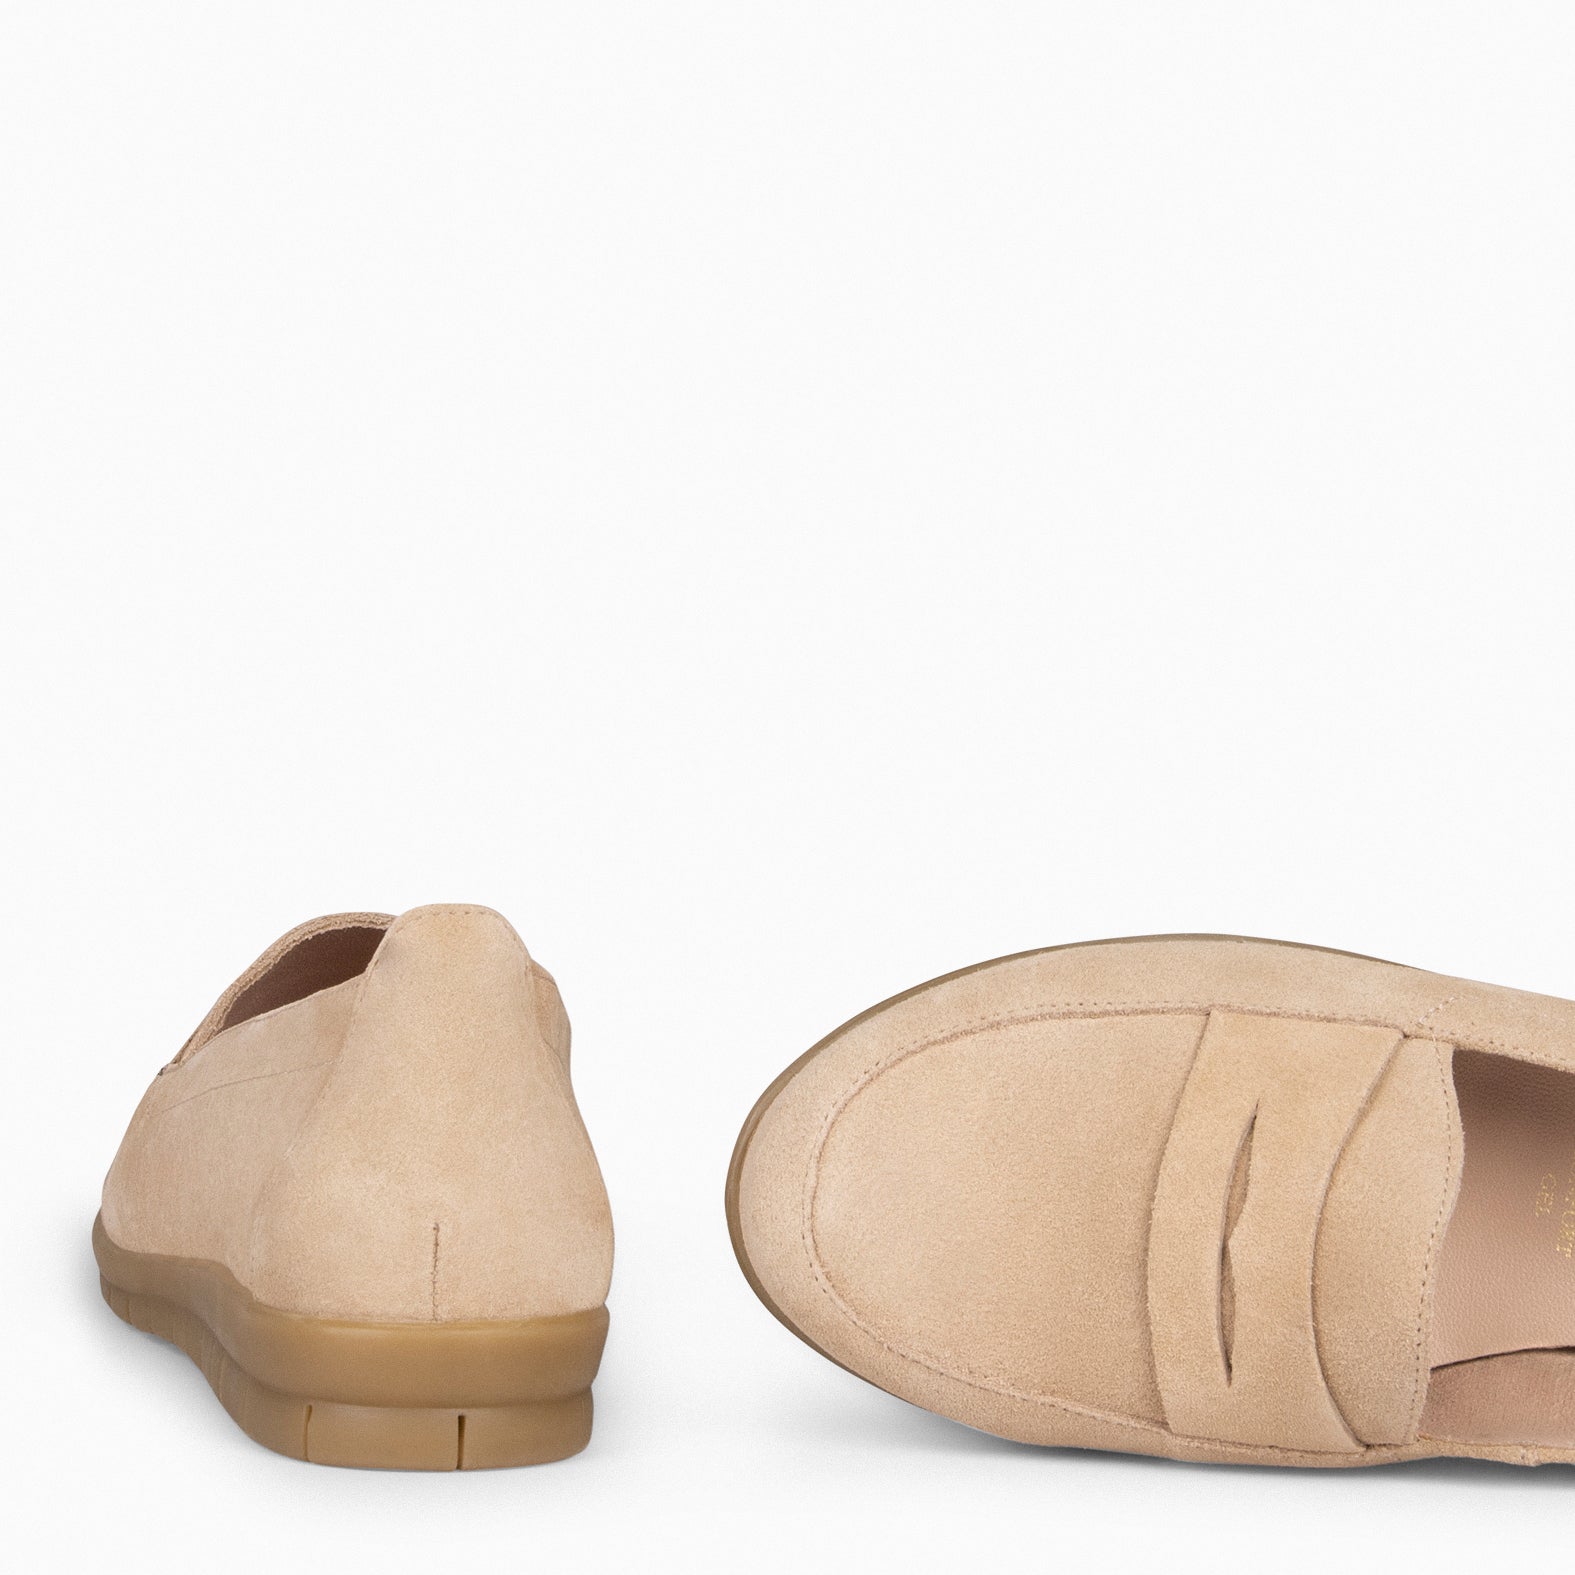 360 – TAN moccasins with mask